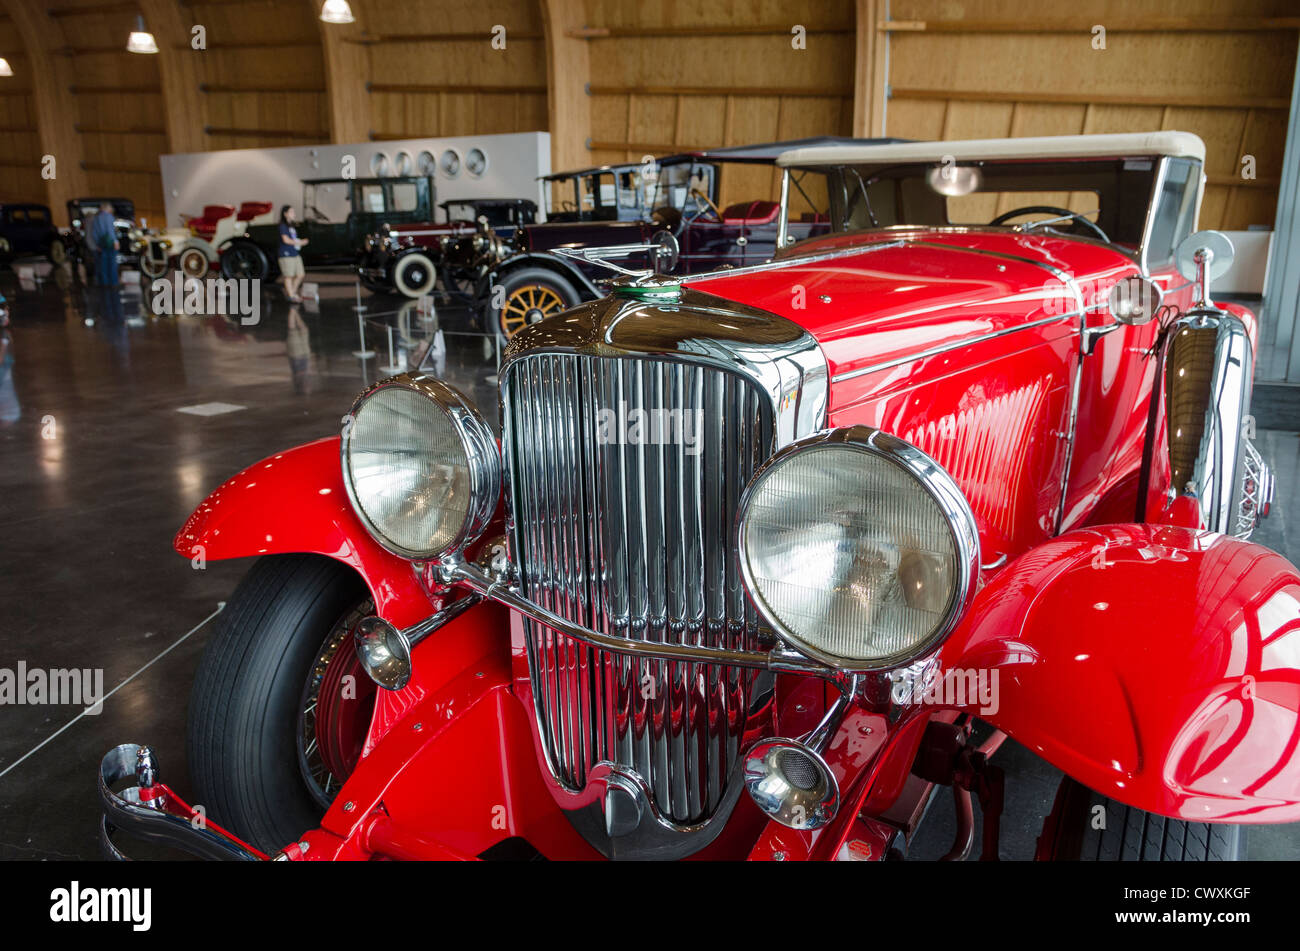 Old red classic car at Le May: America's Car Museum, Tacoma, Washington State, USA Stock Photo